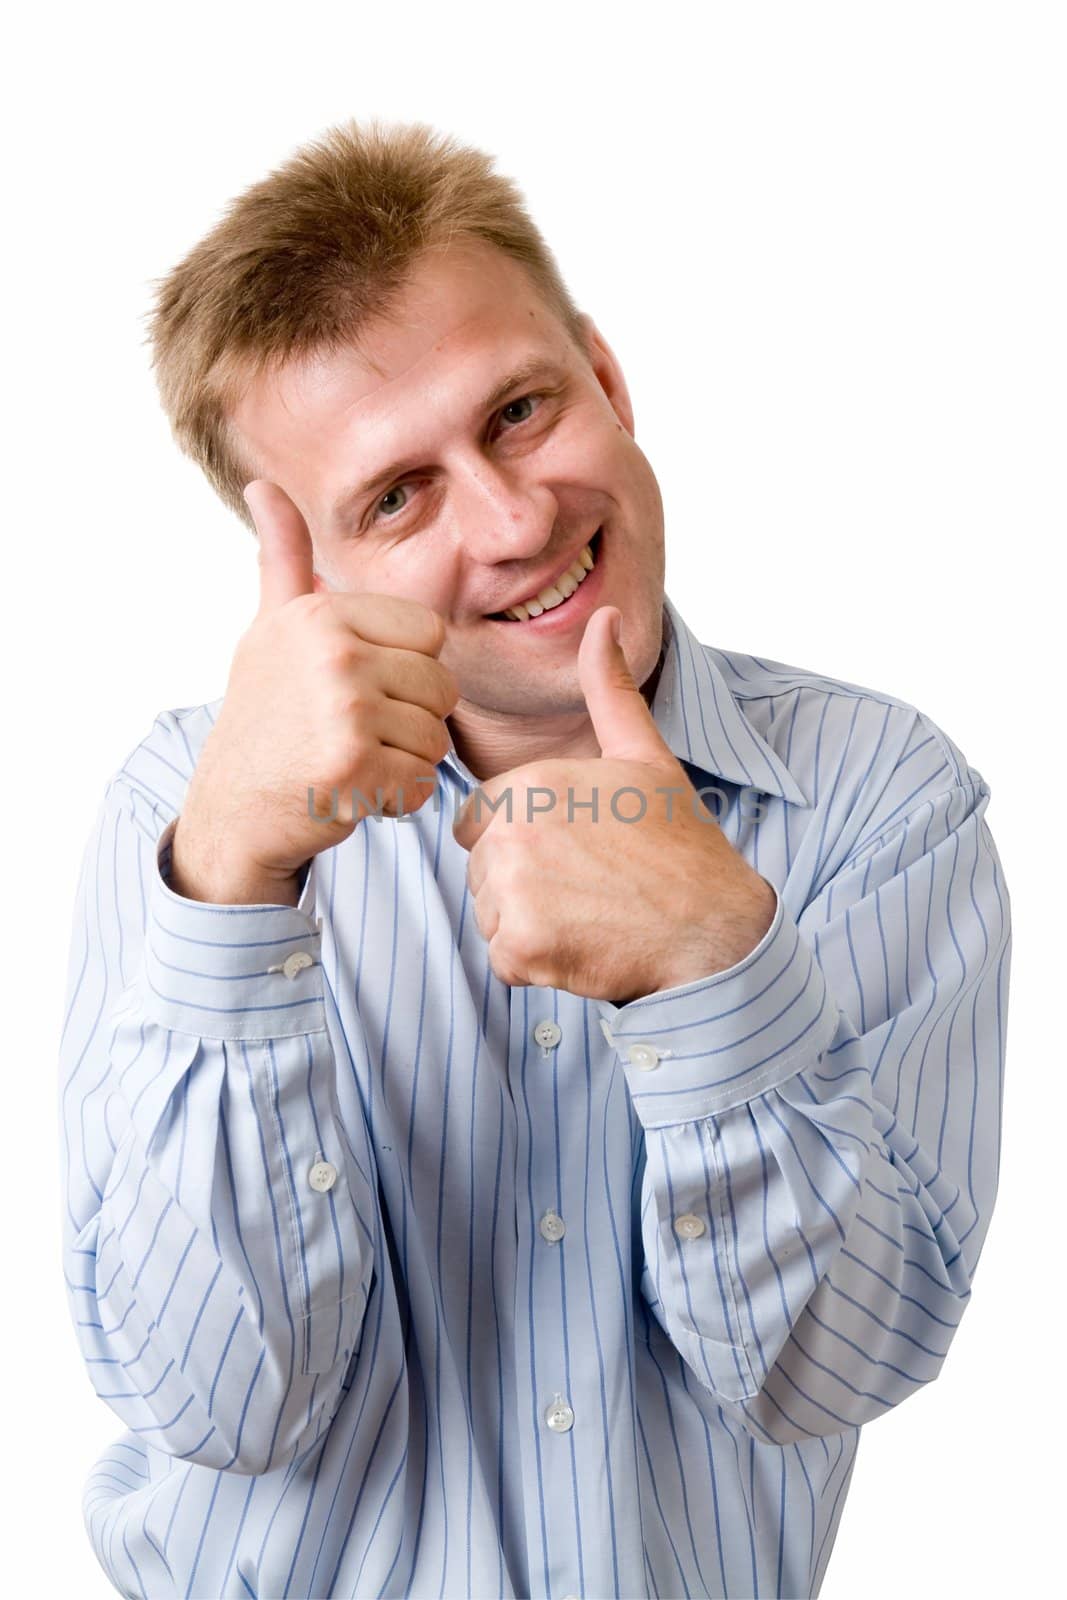 smiling young man with thumbs up on a white background